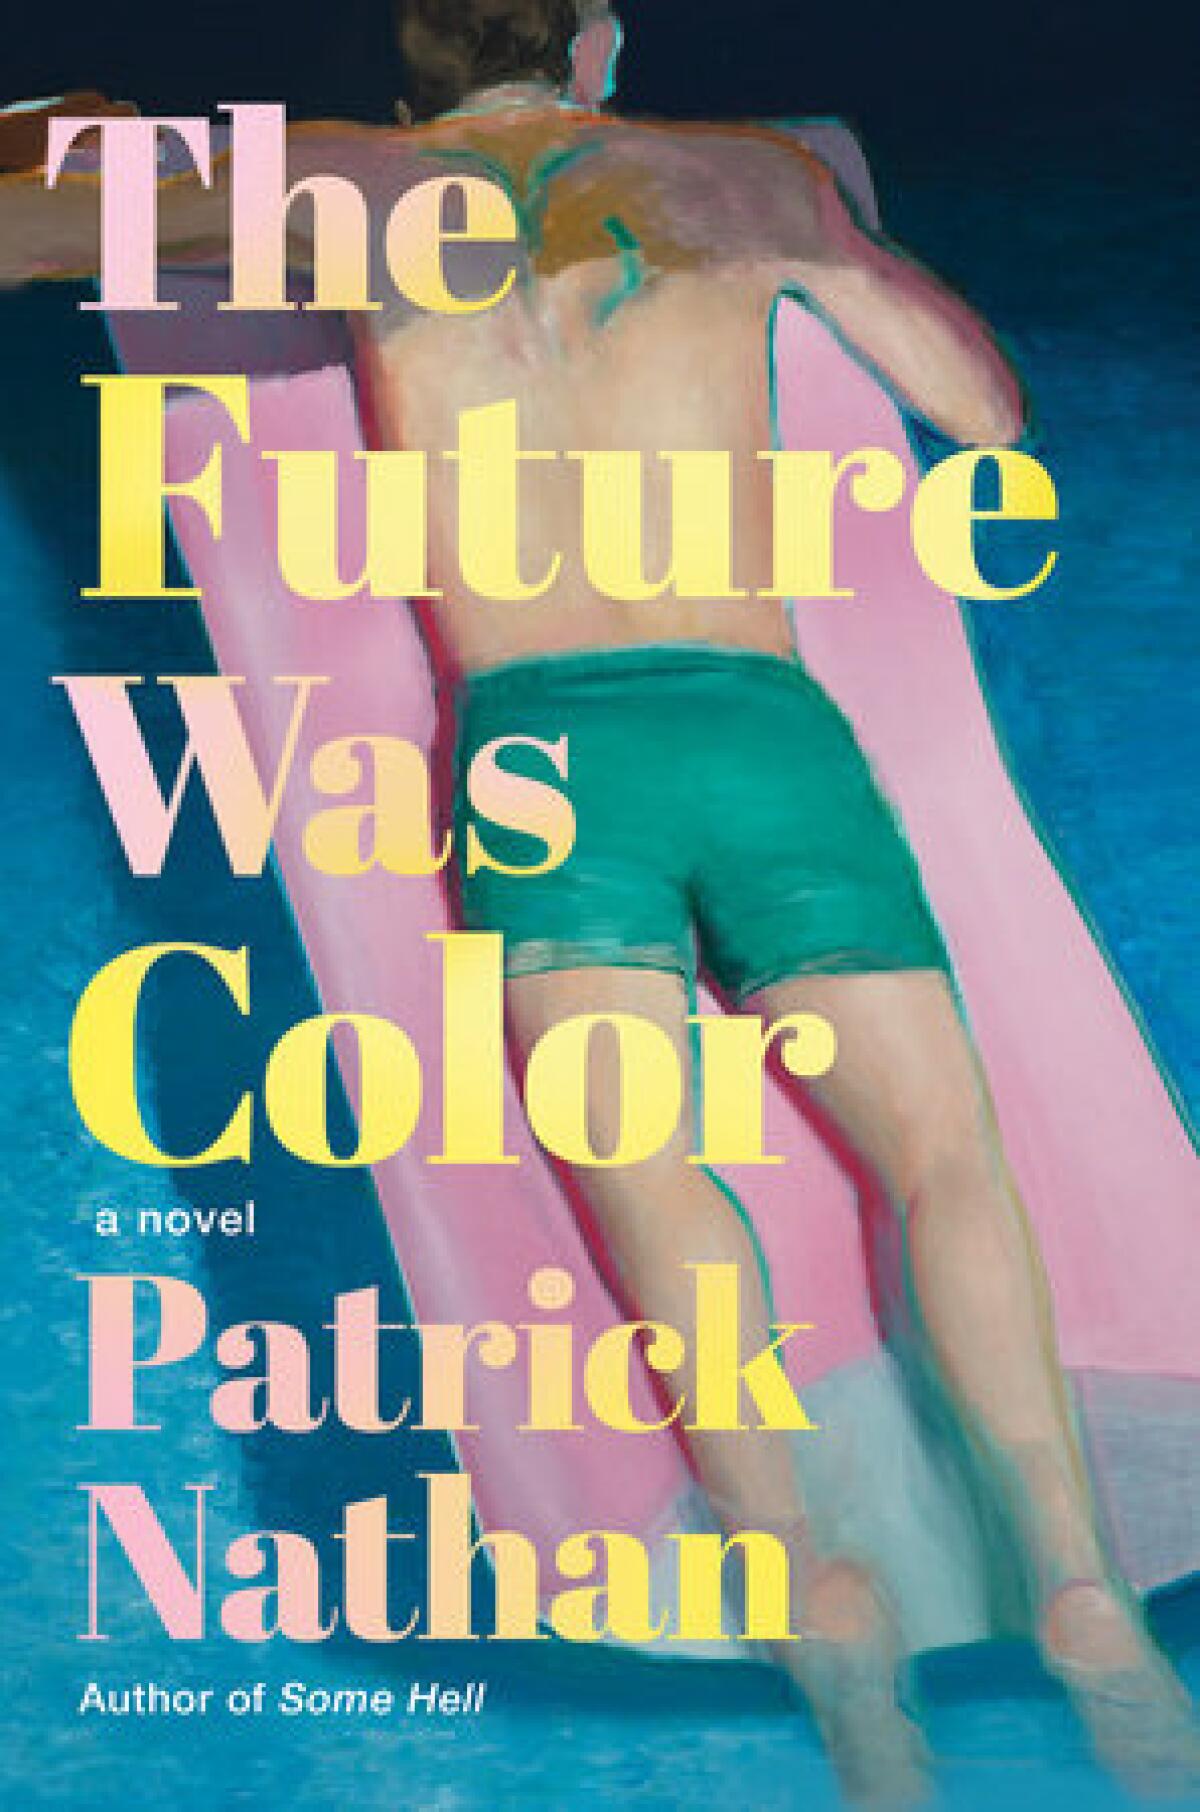 Cover of "The Future Was Color"